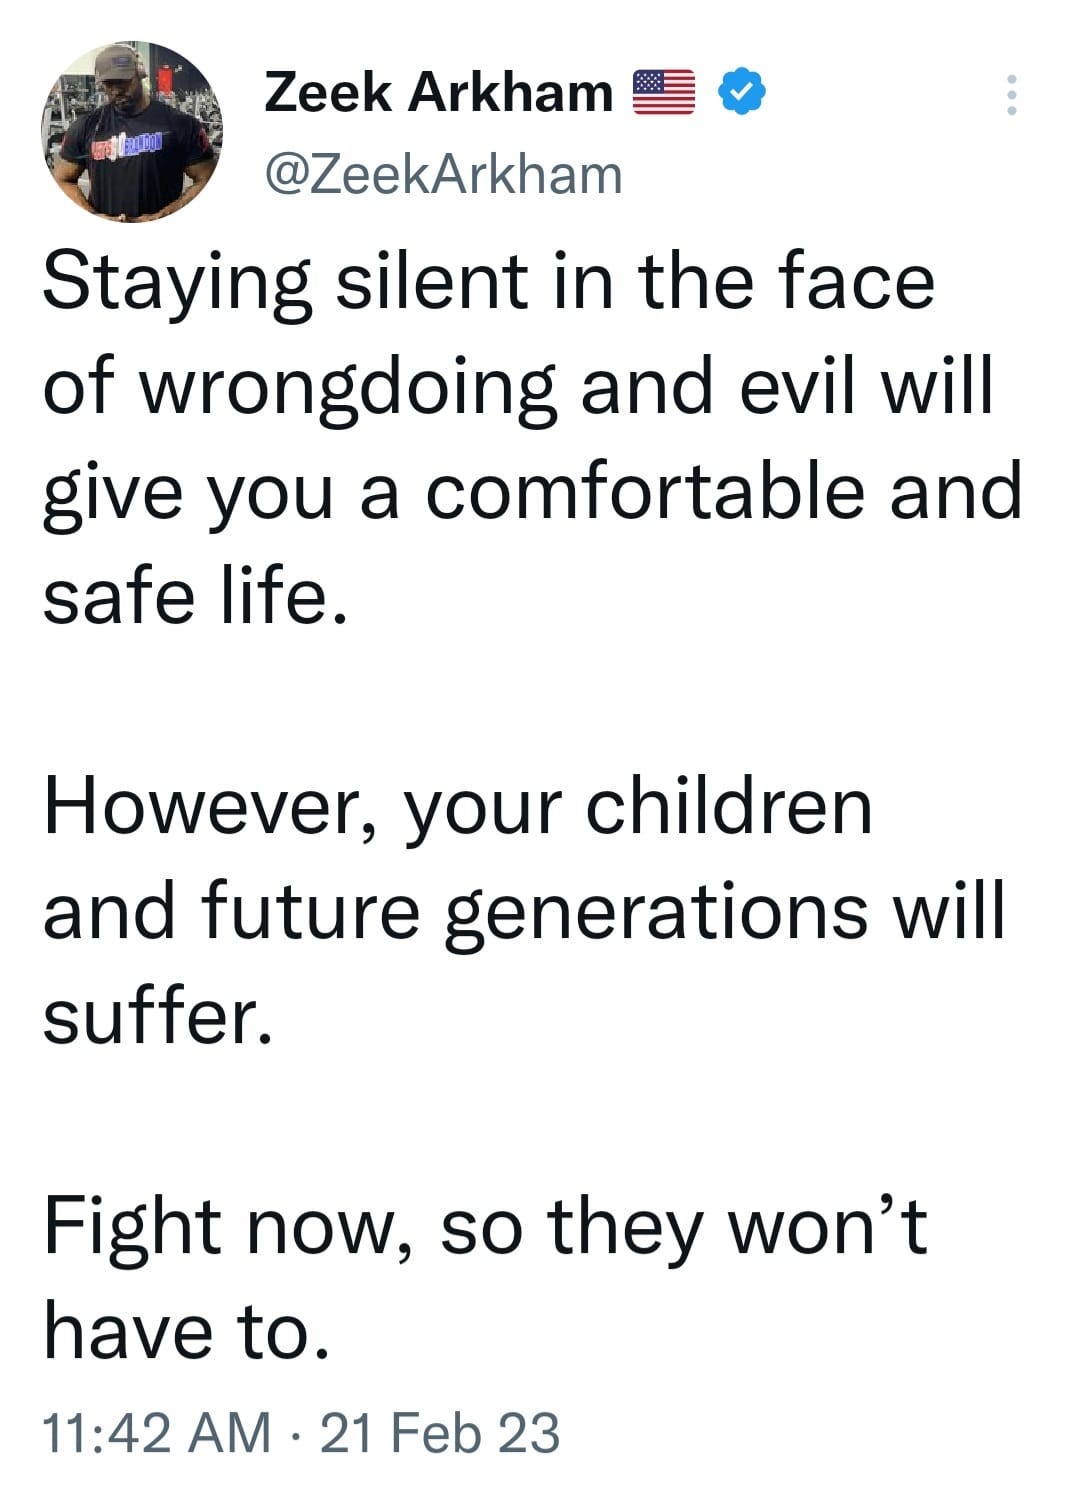 May be an image of 1 person and text that says 'Zeek Arkham @ZeekArkham Staying silent in the face of wrongdoing and evil will give you a comfortable and safe life. However, your children and future generations will suffer. Fight now, so they won't have to. 11:42 AM 21 Feb 23'